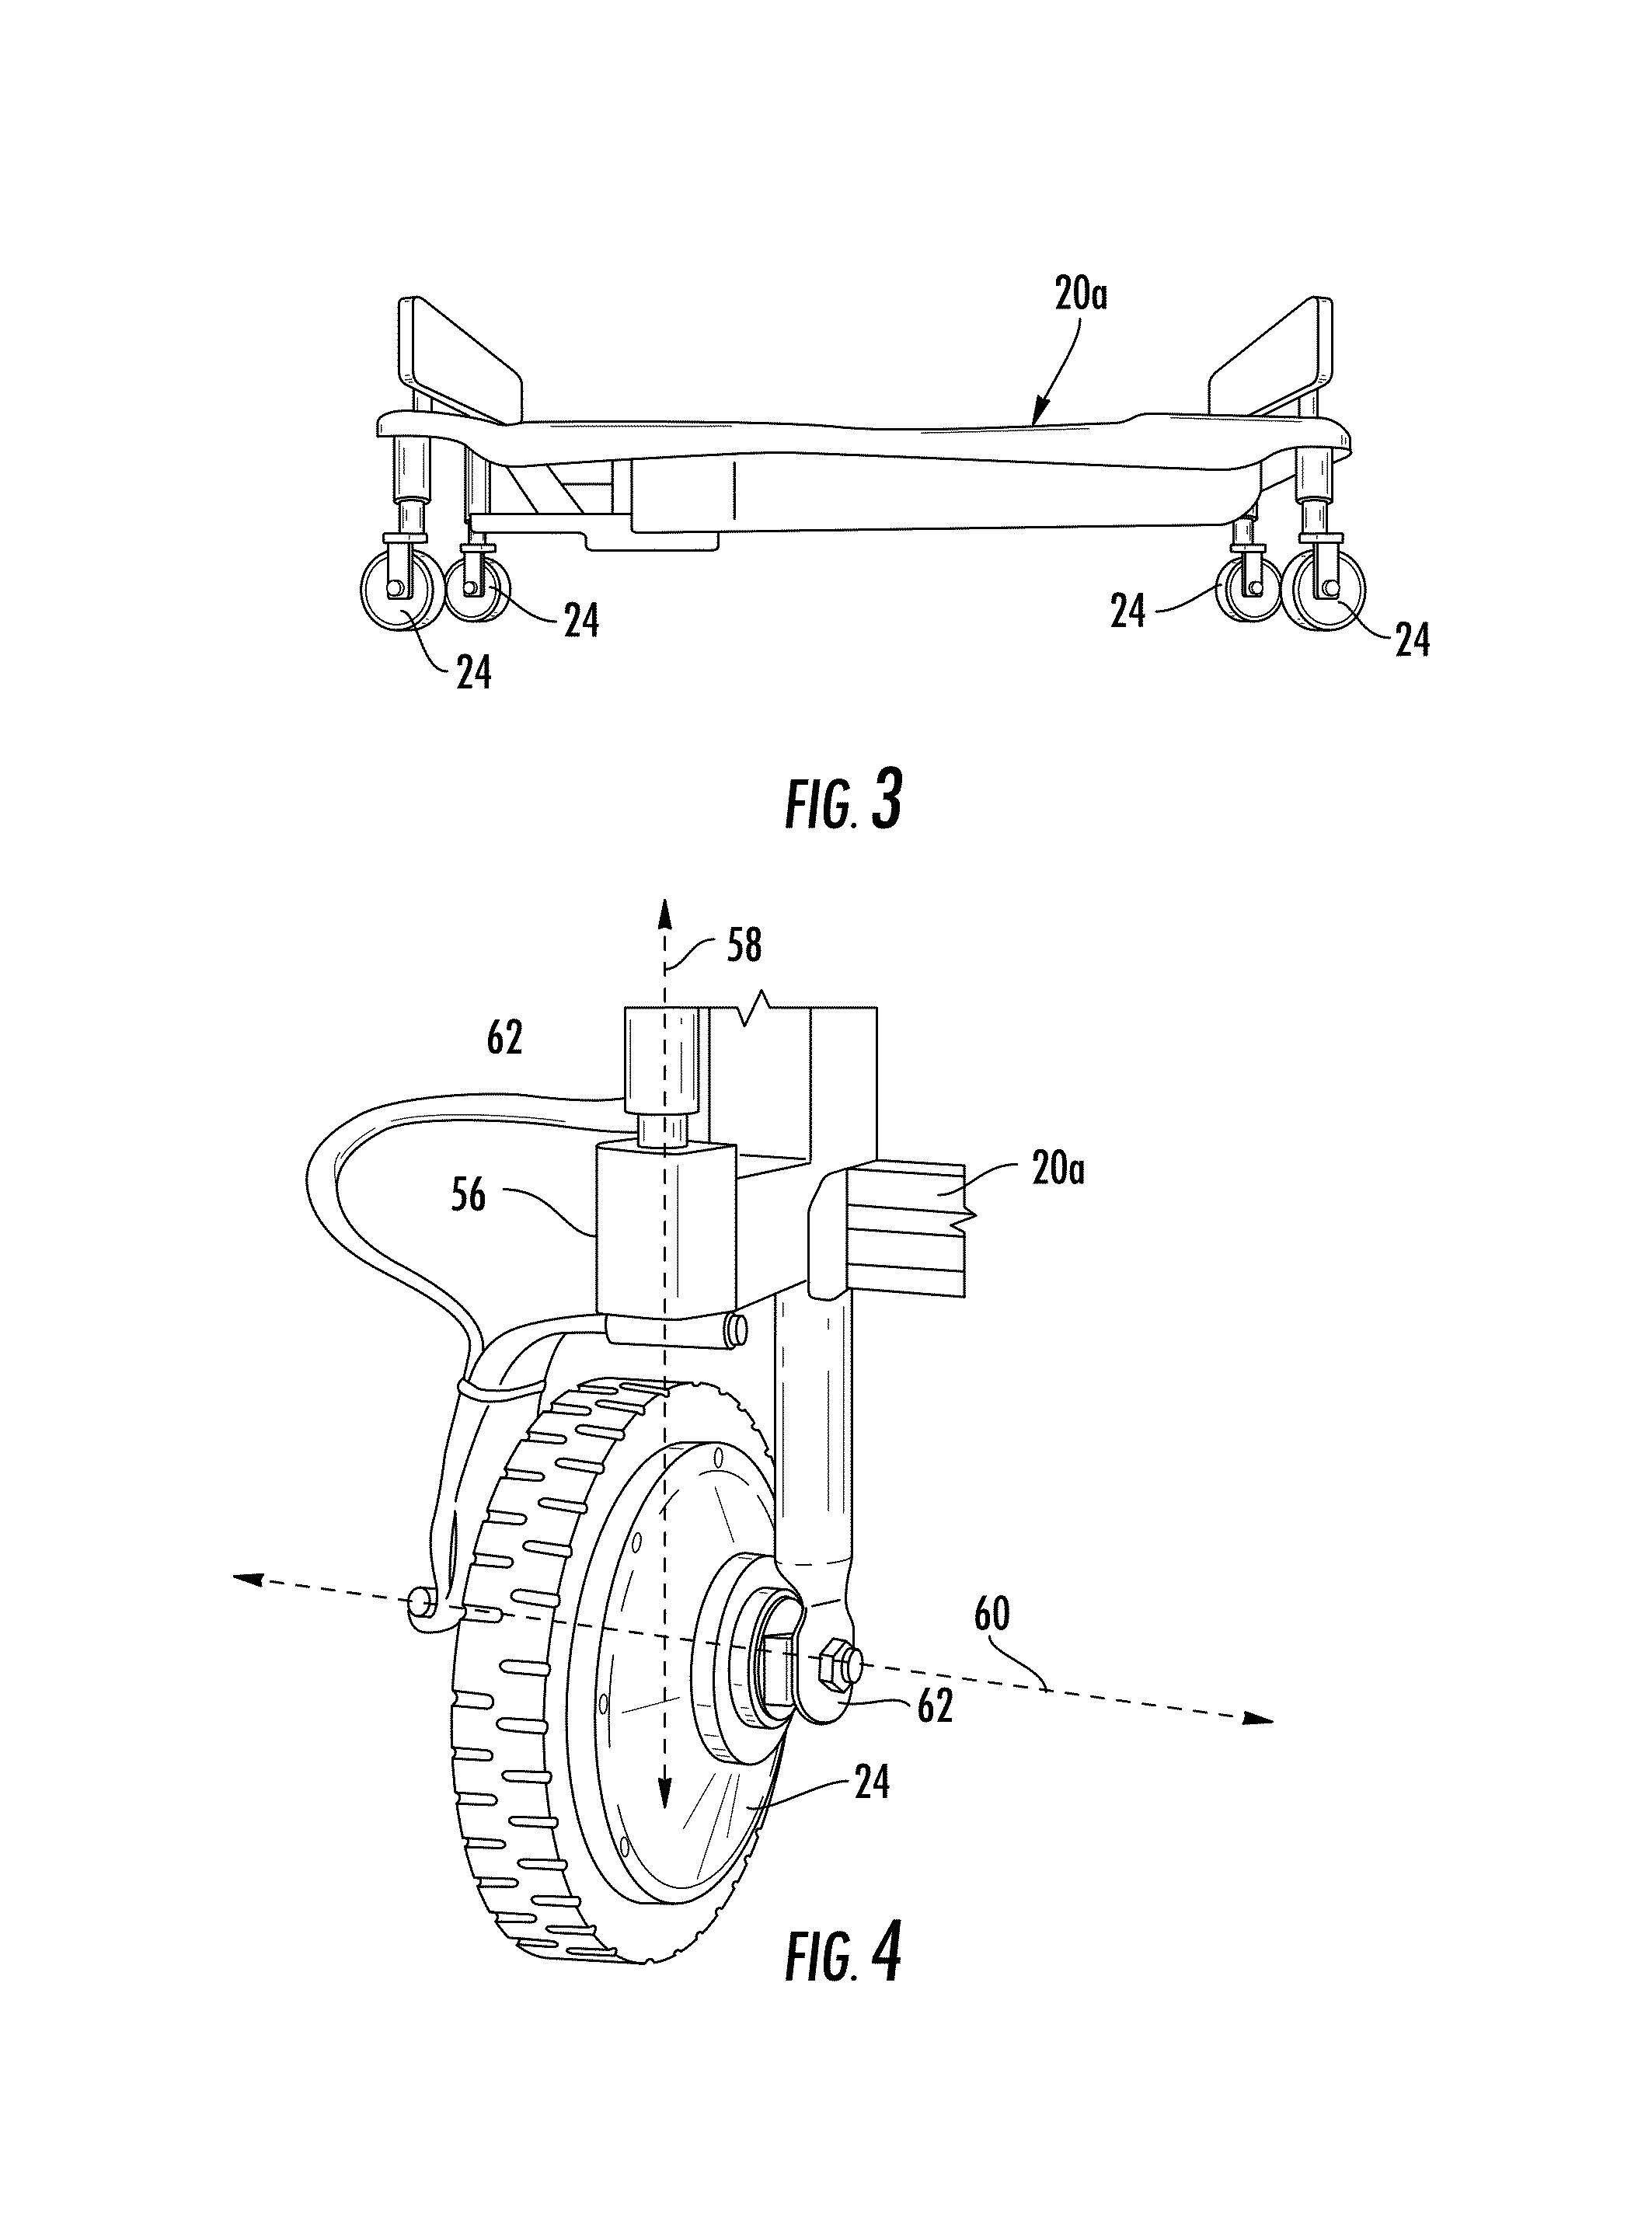 Powered patient support apparatus